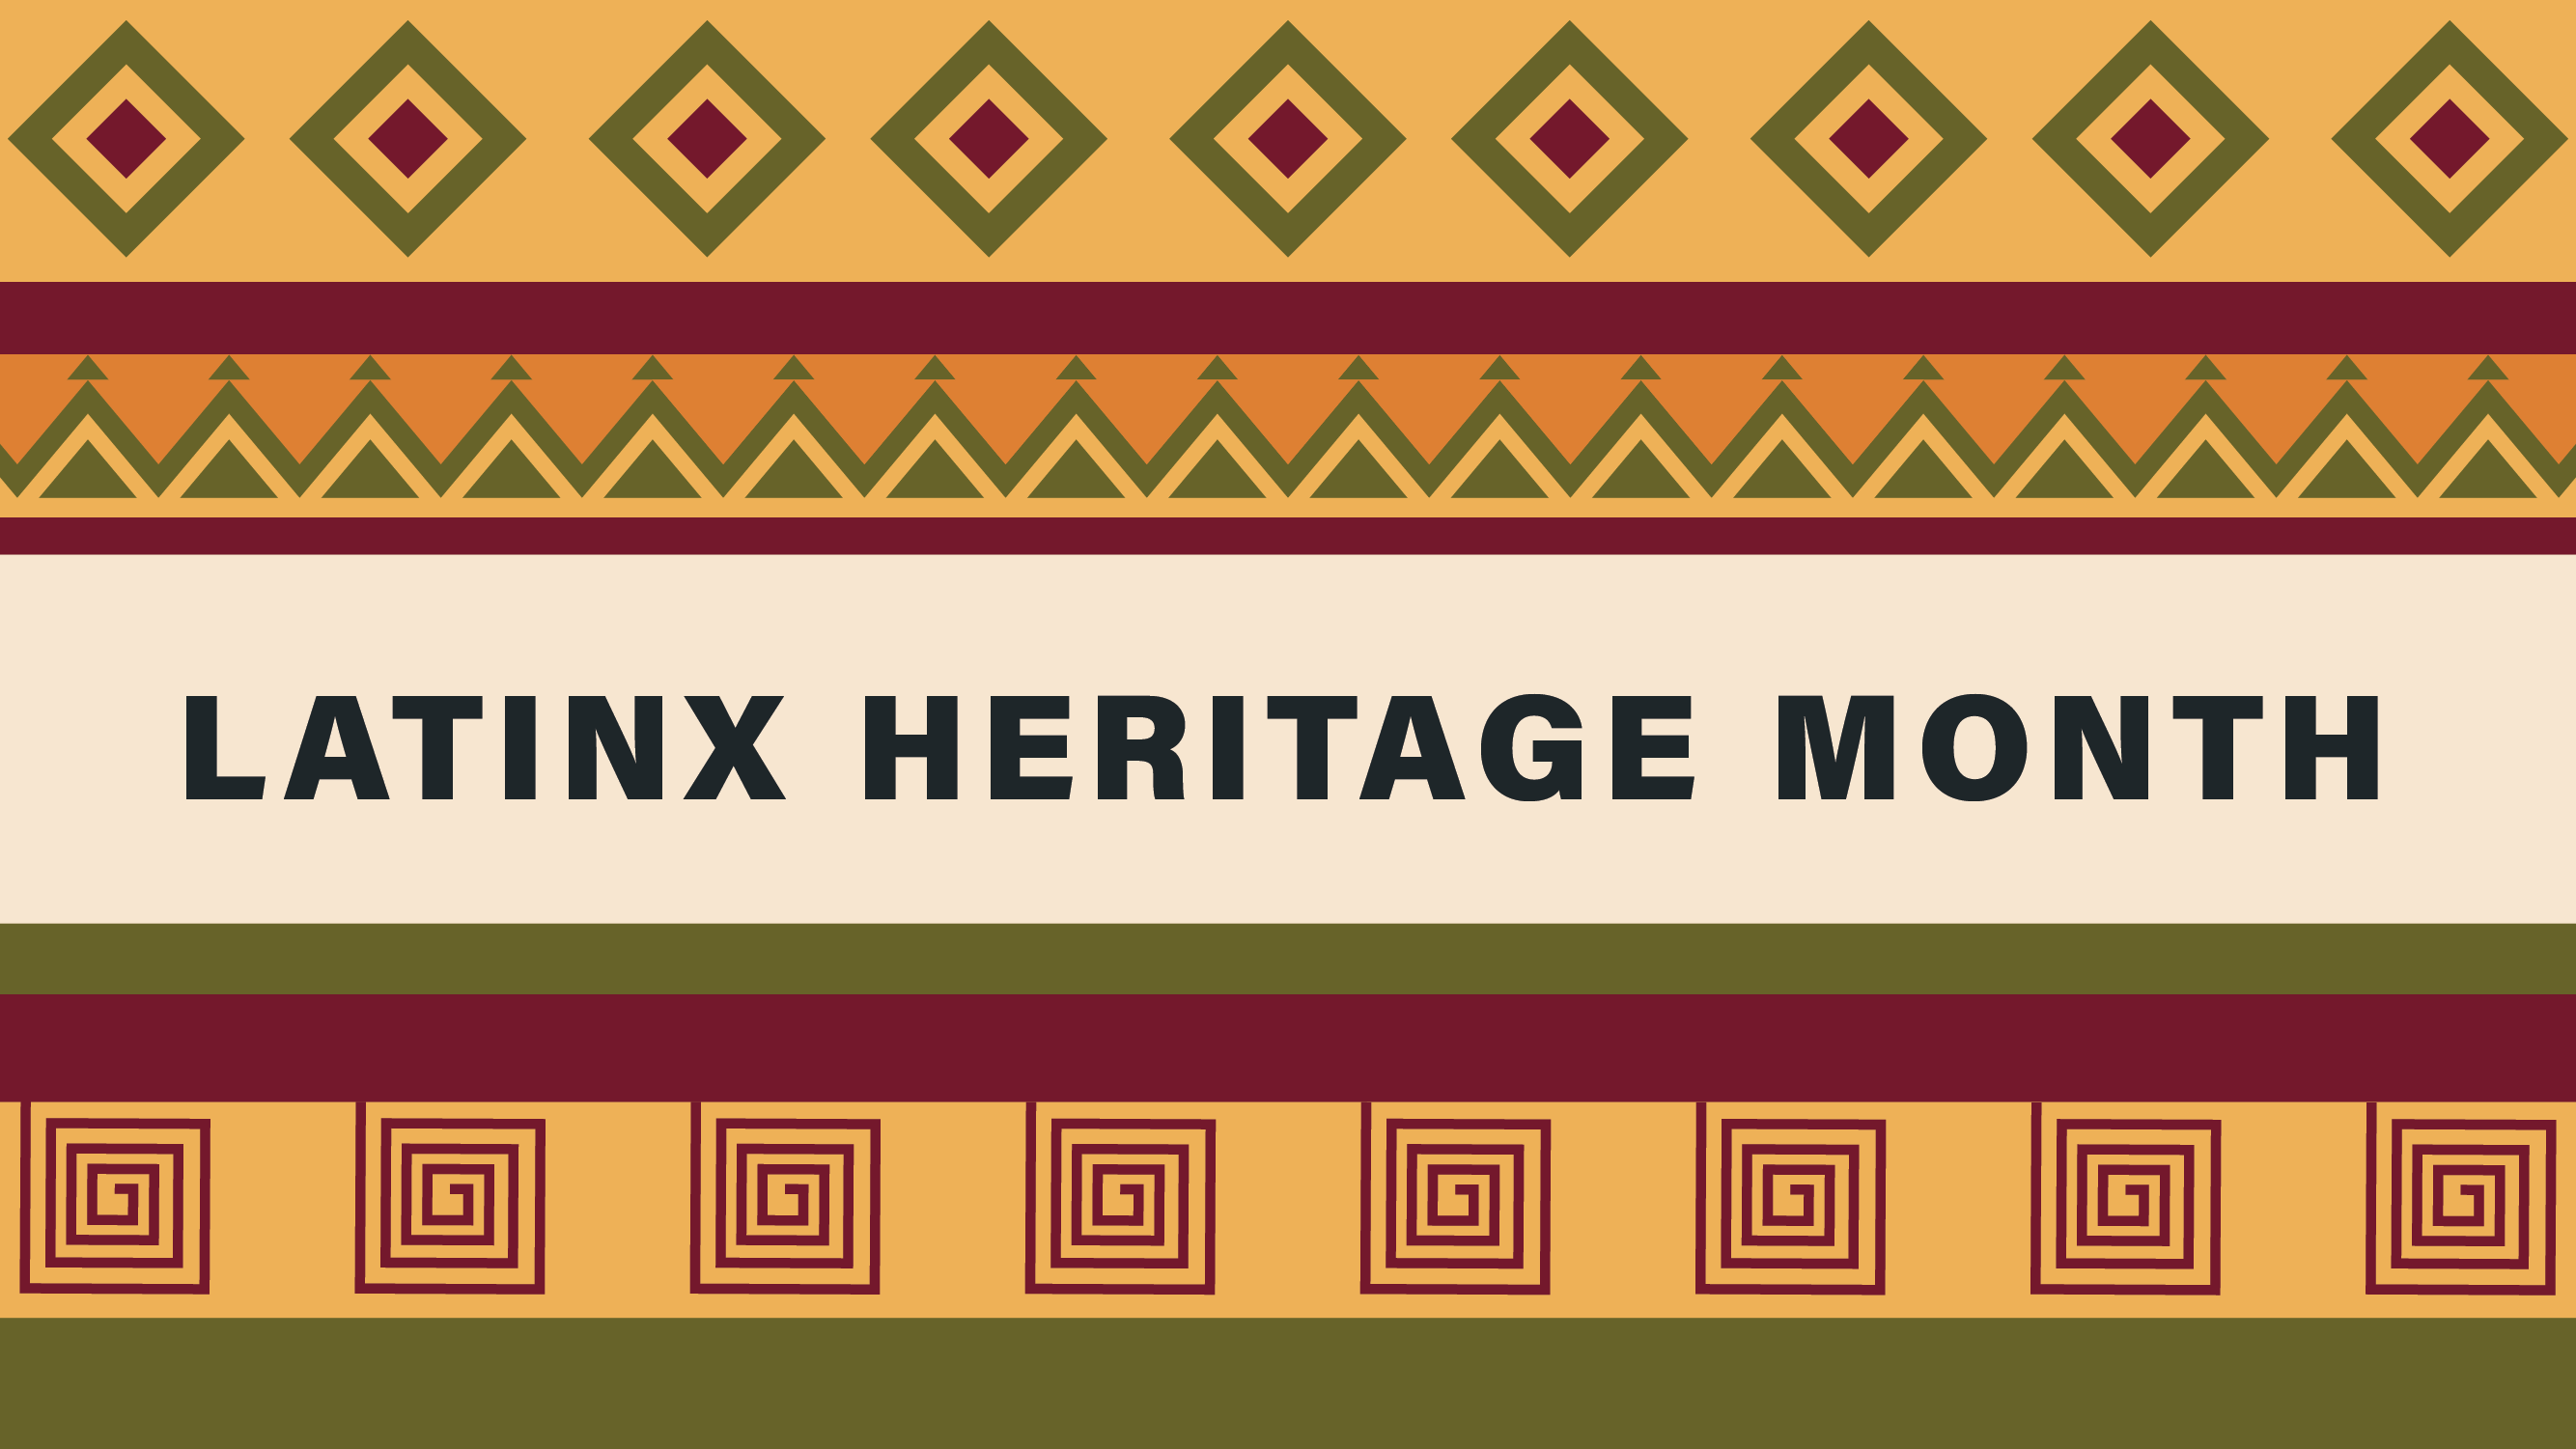 Latinx Heritage Month text with a colorful pattern of squares, triangles and other shapes.